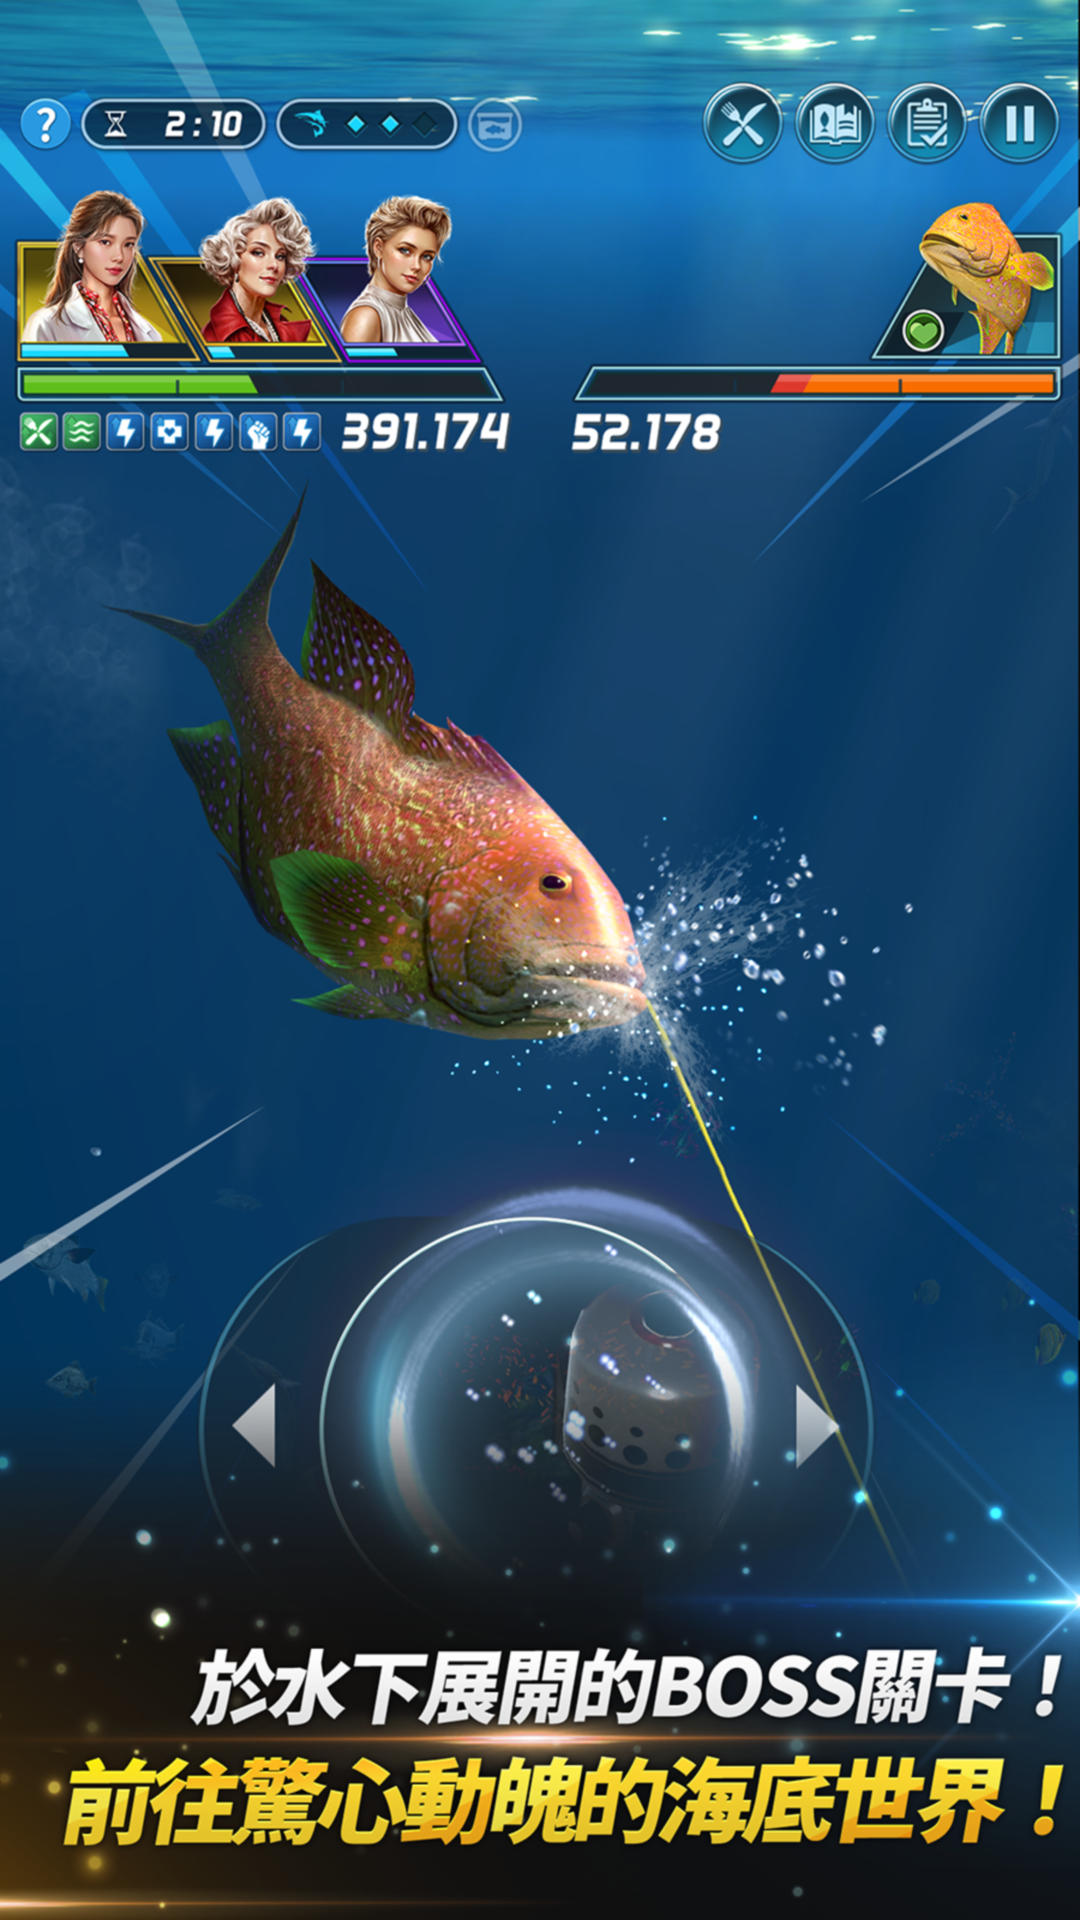 Ace Fishing Crew: A New Fishing Adventure Game with Competitive